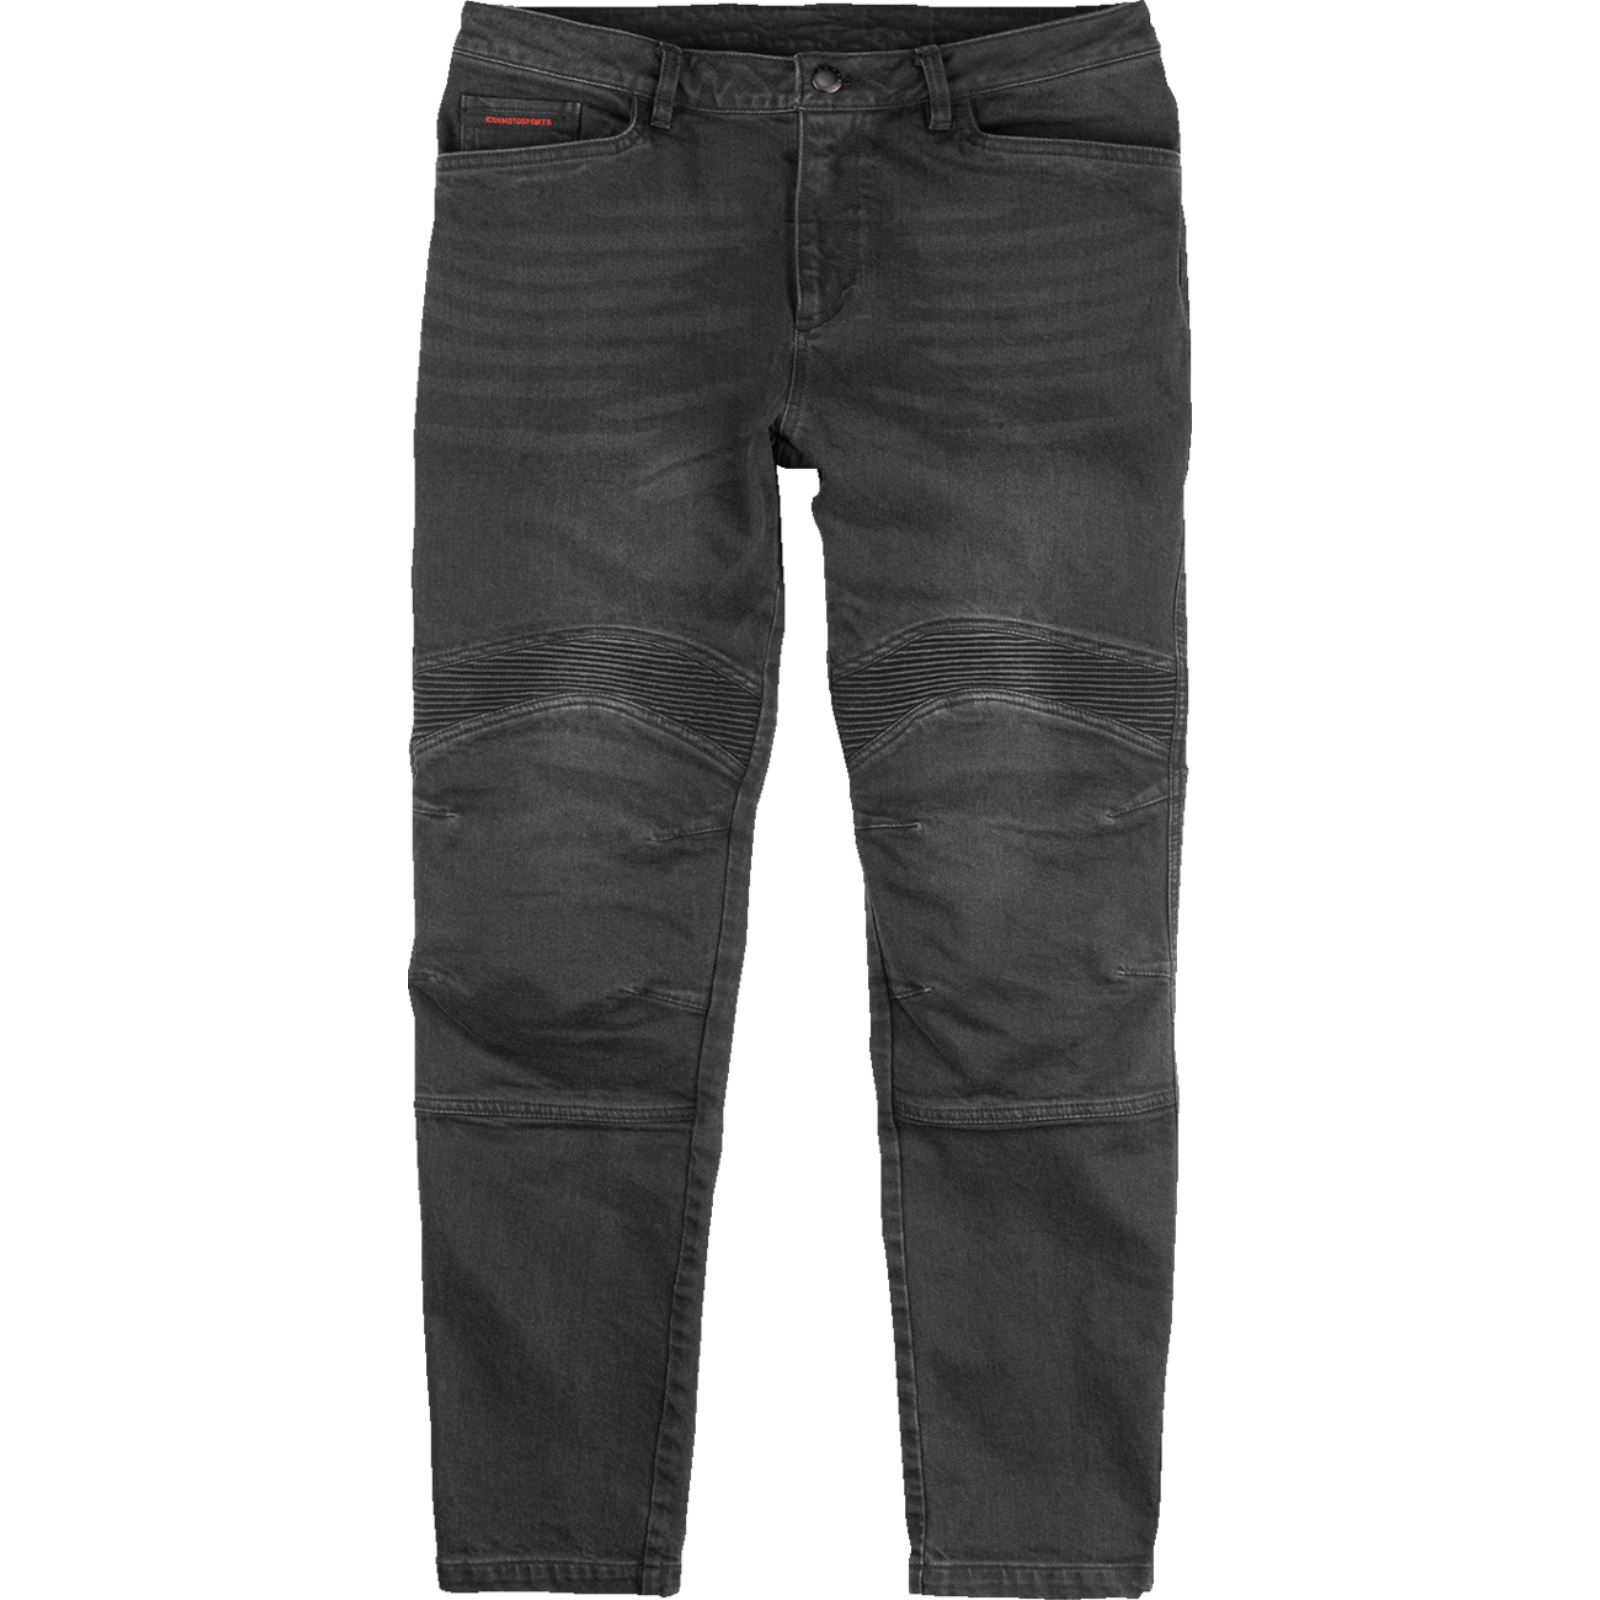 Icon Slabtown Motorcycle Jeans - Black - US Size 42 - Motorcycle, ATV / UTV & Powersports | The Powersports, Motorcycle, ATV Snow Gear, Accessories and More